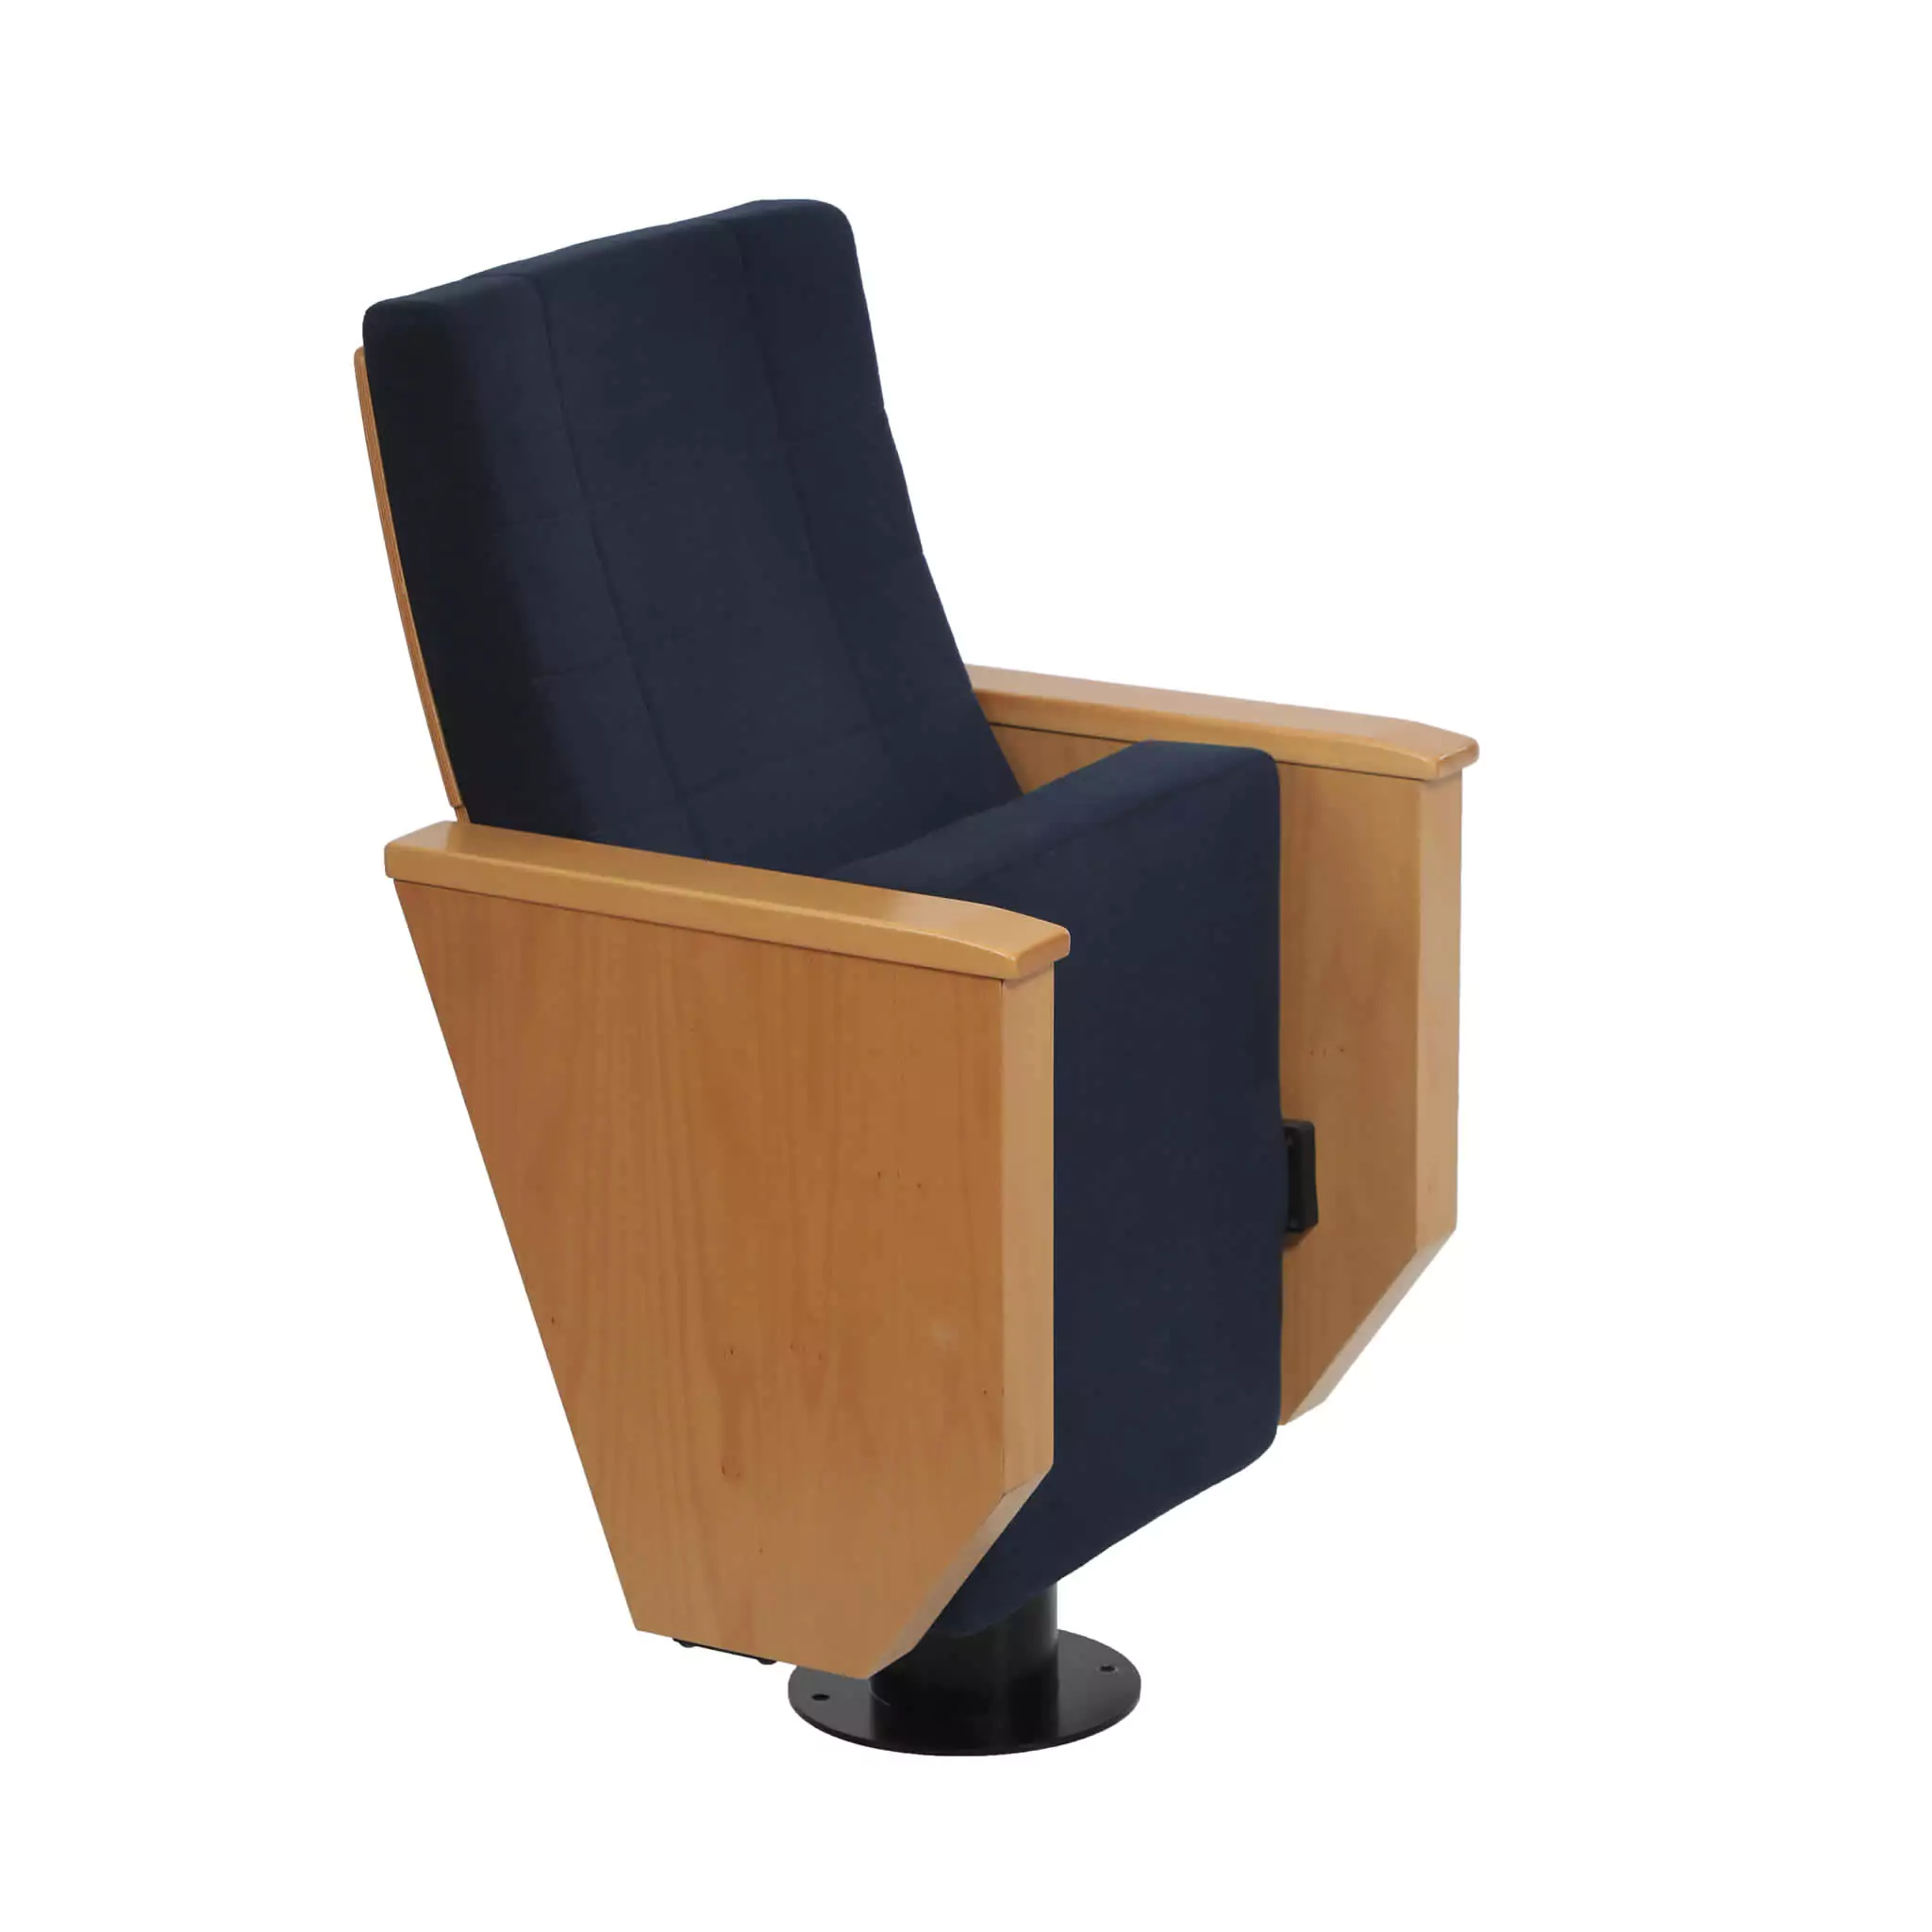 Simko Seating Products Conference Seat Safir ST 04